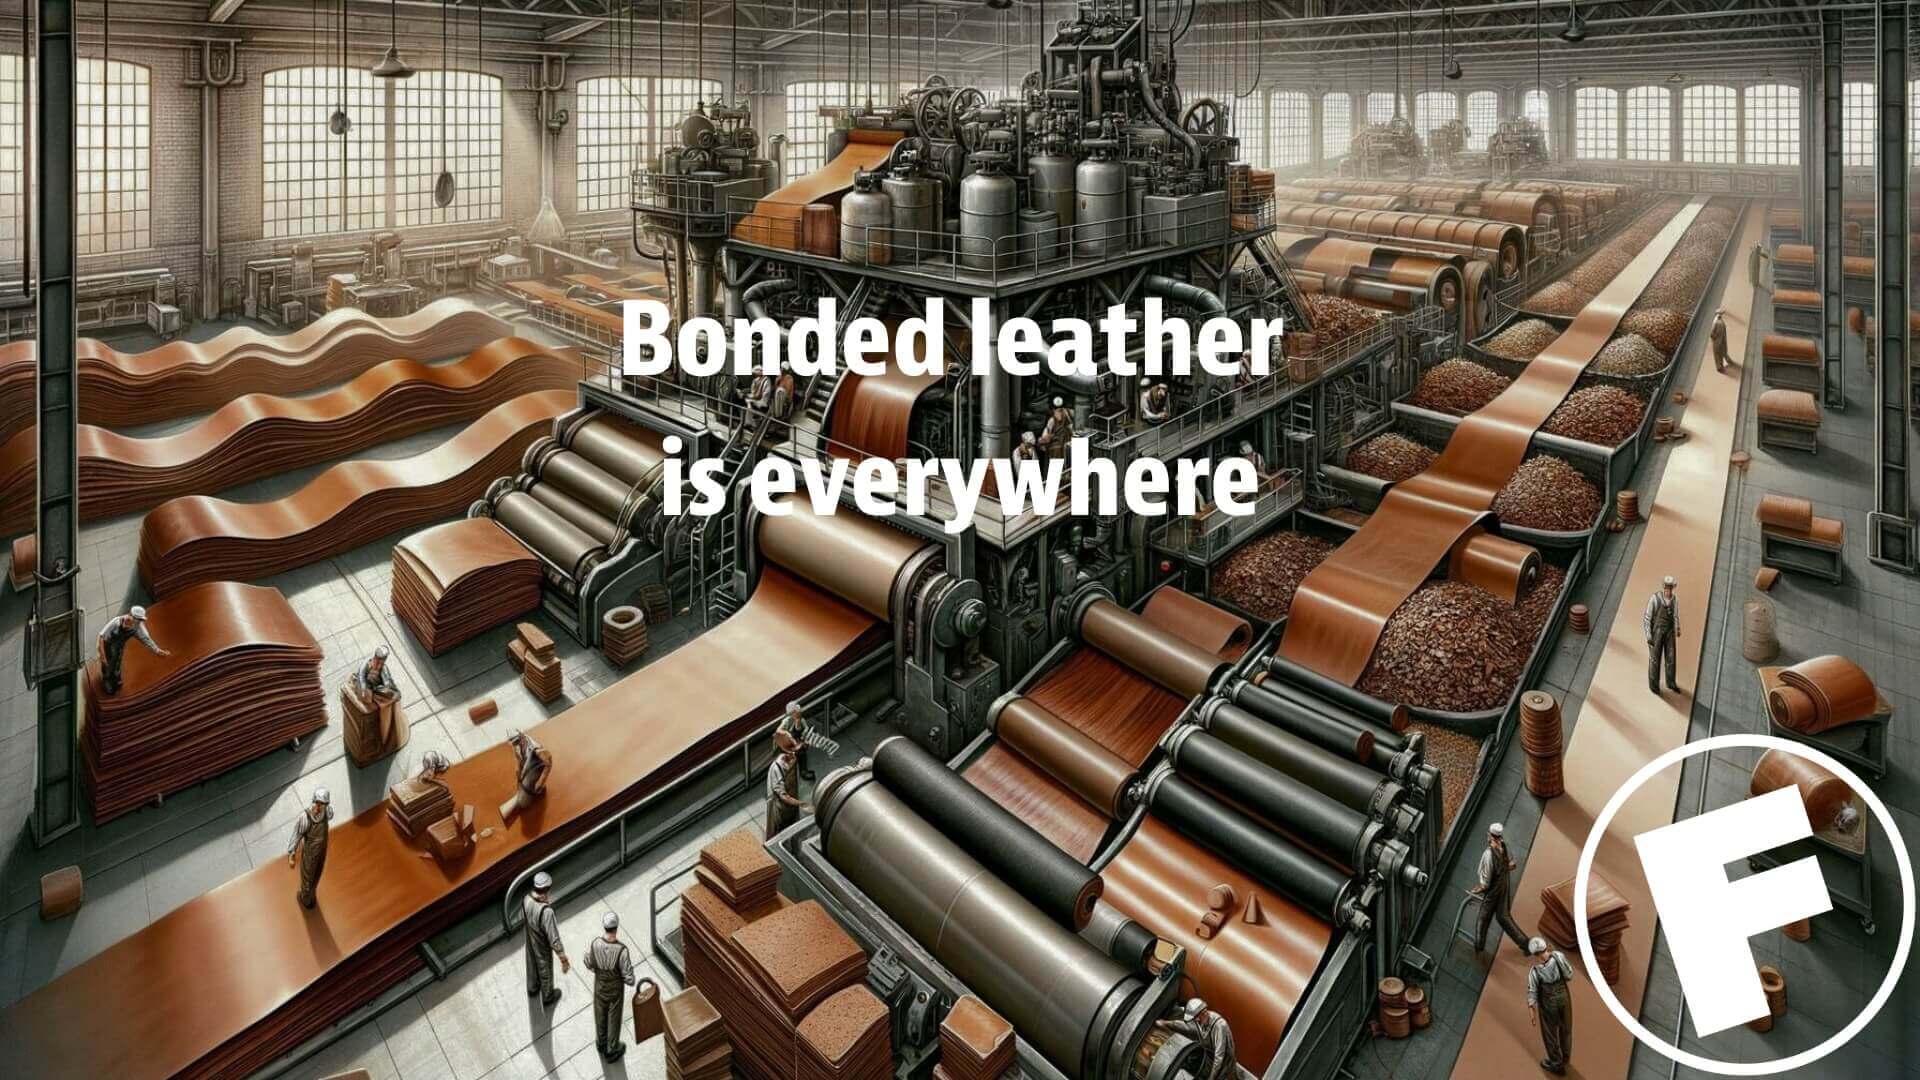 a massive factory where they are manufacturing bonded leather